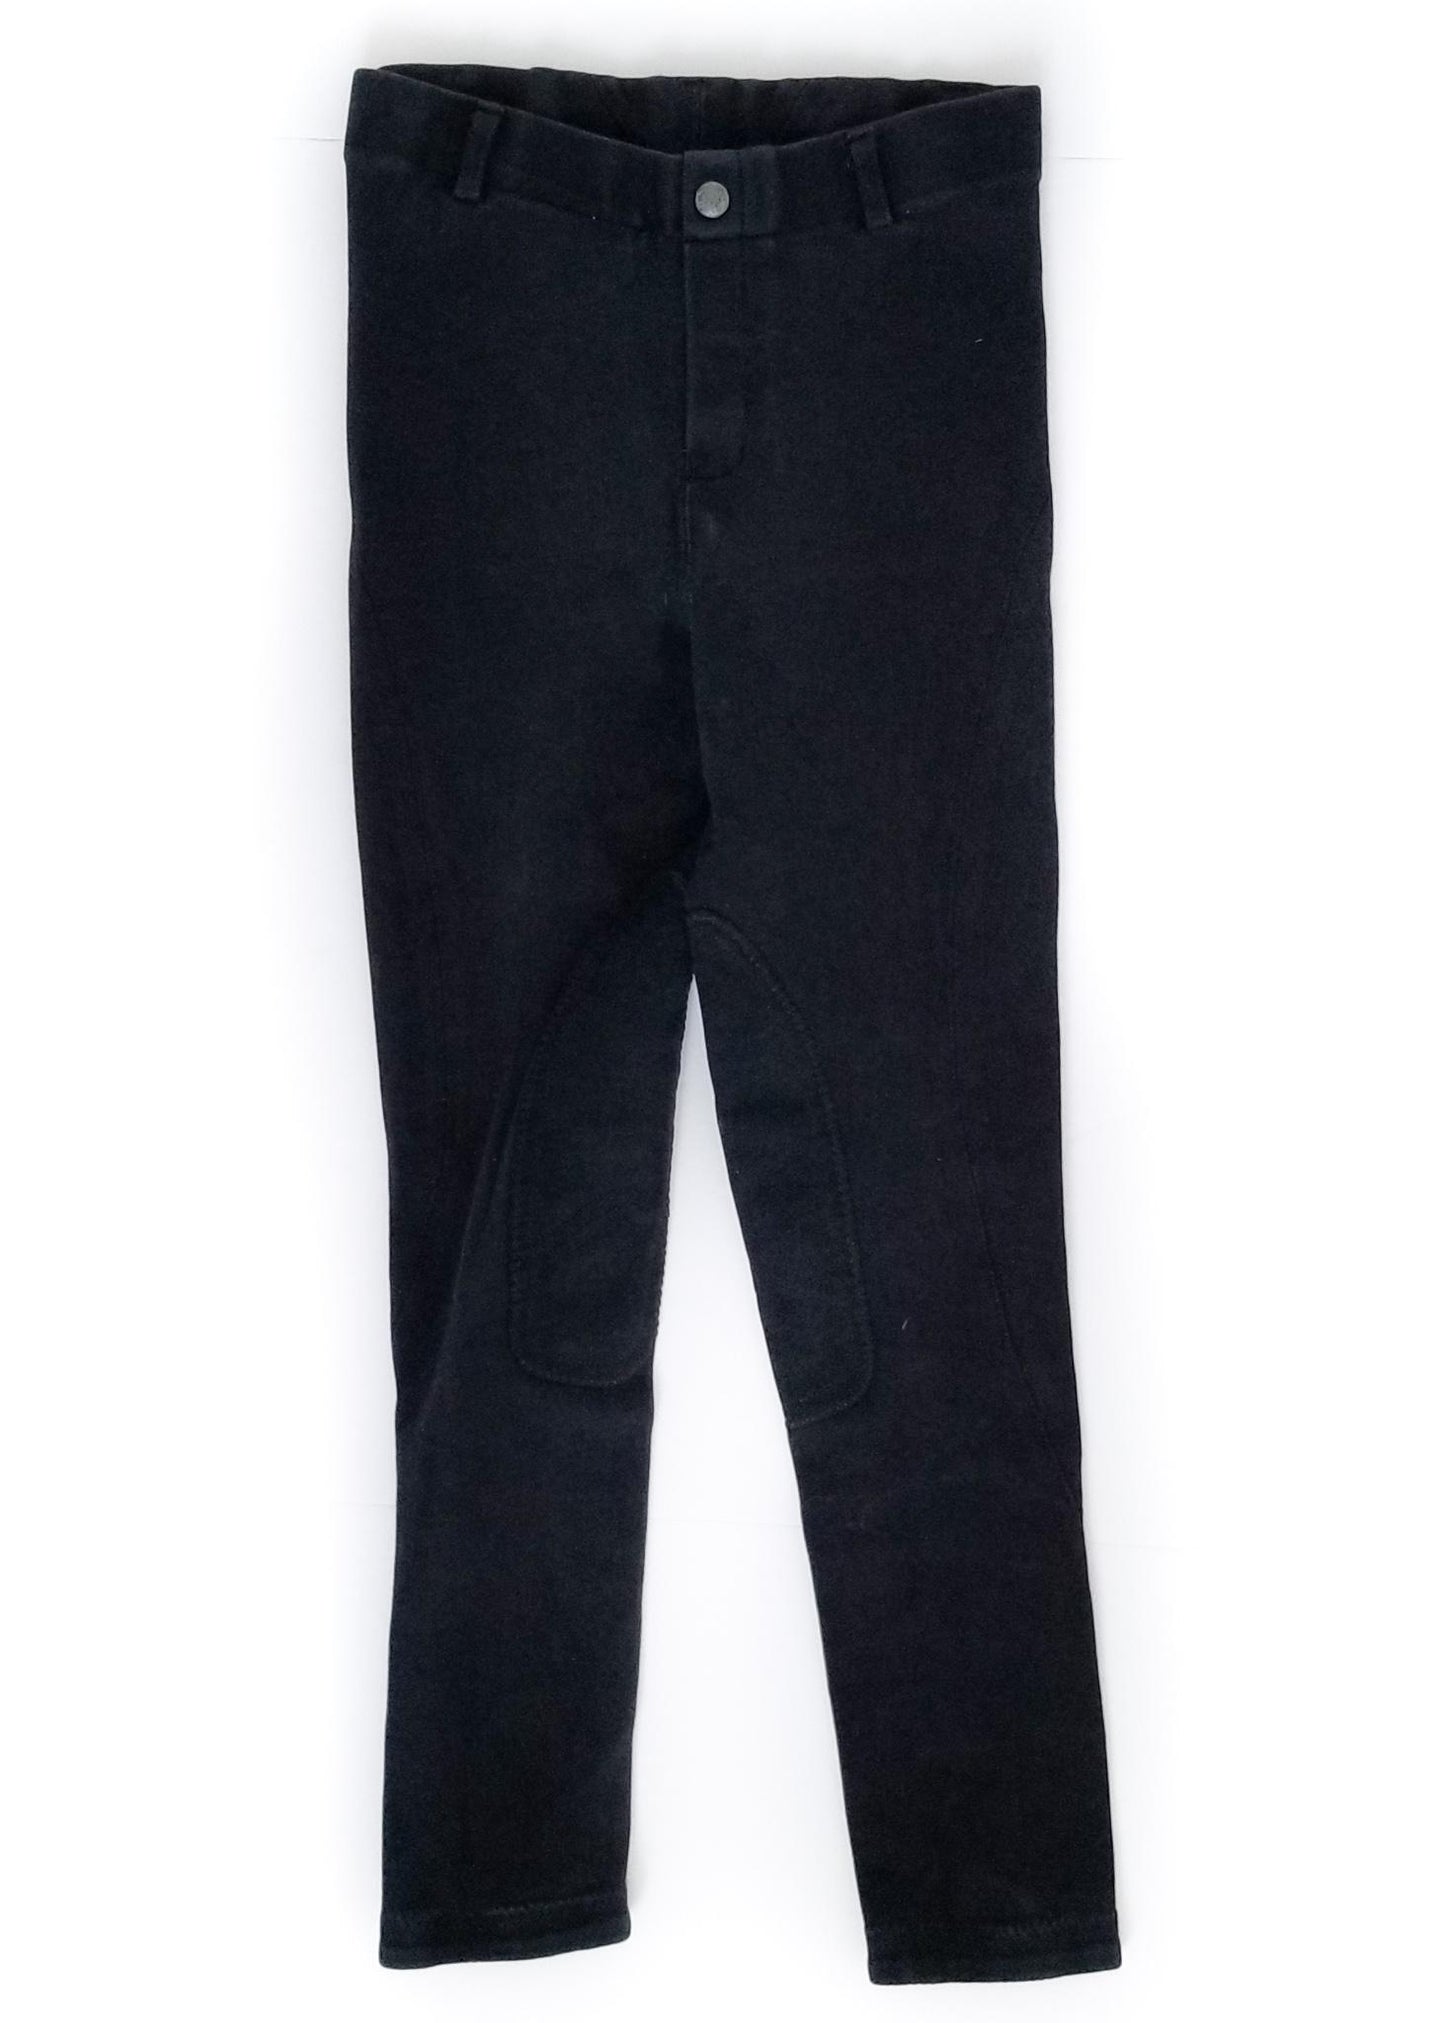 Elation Red Label Pull On Breeches - Black - Youth 14